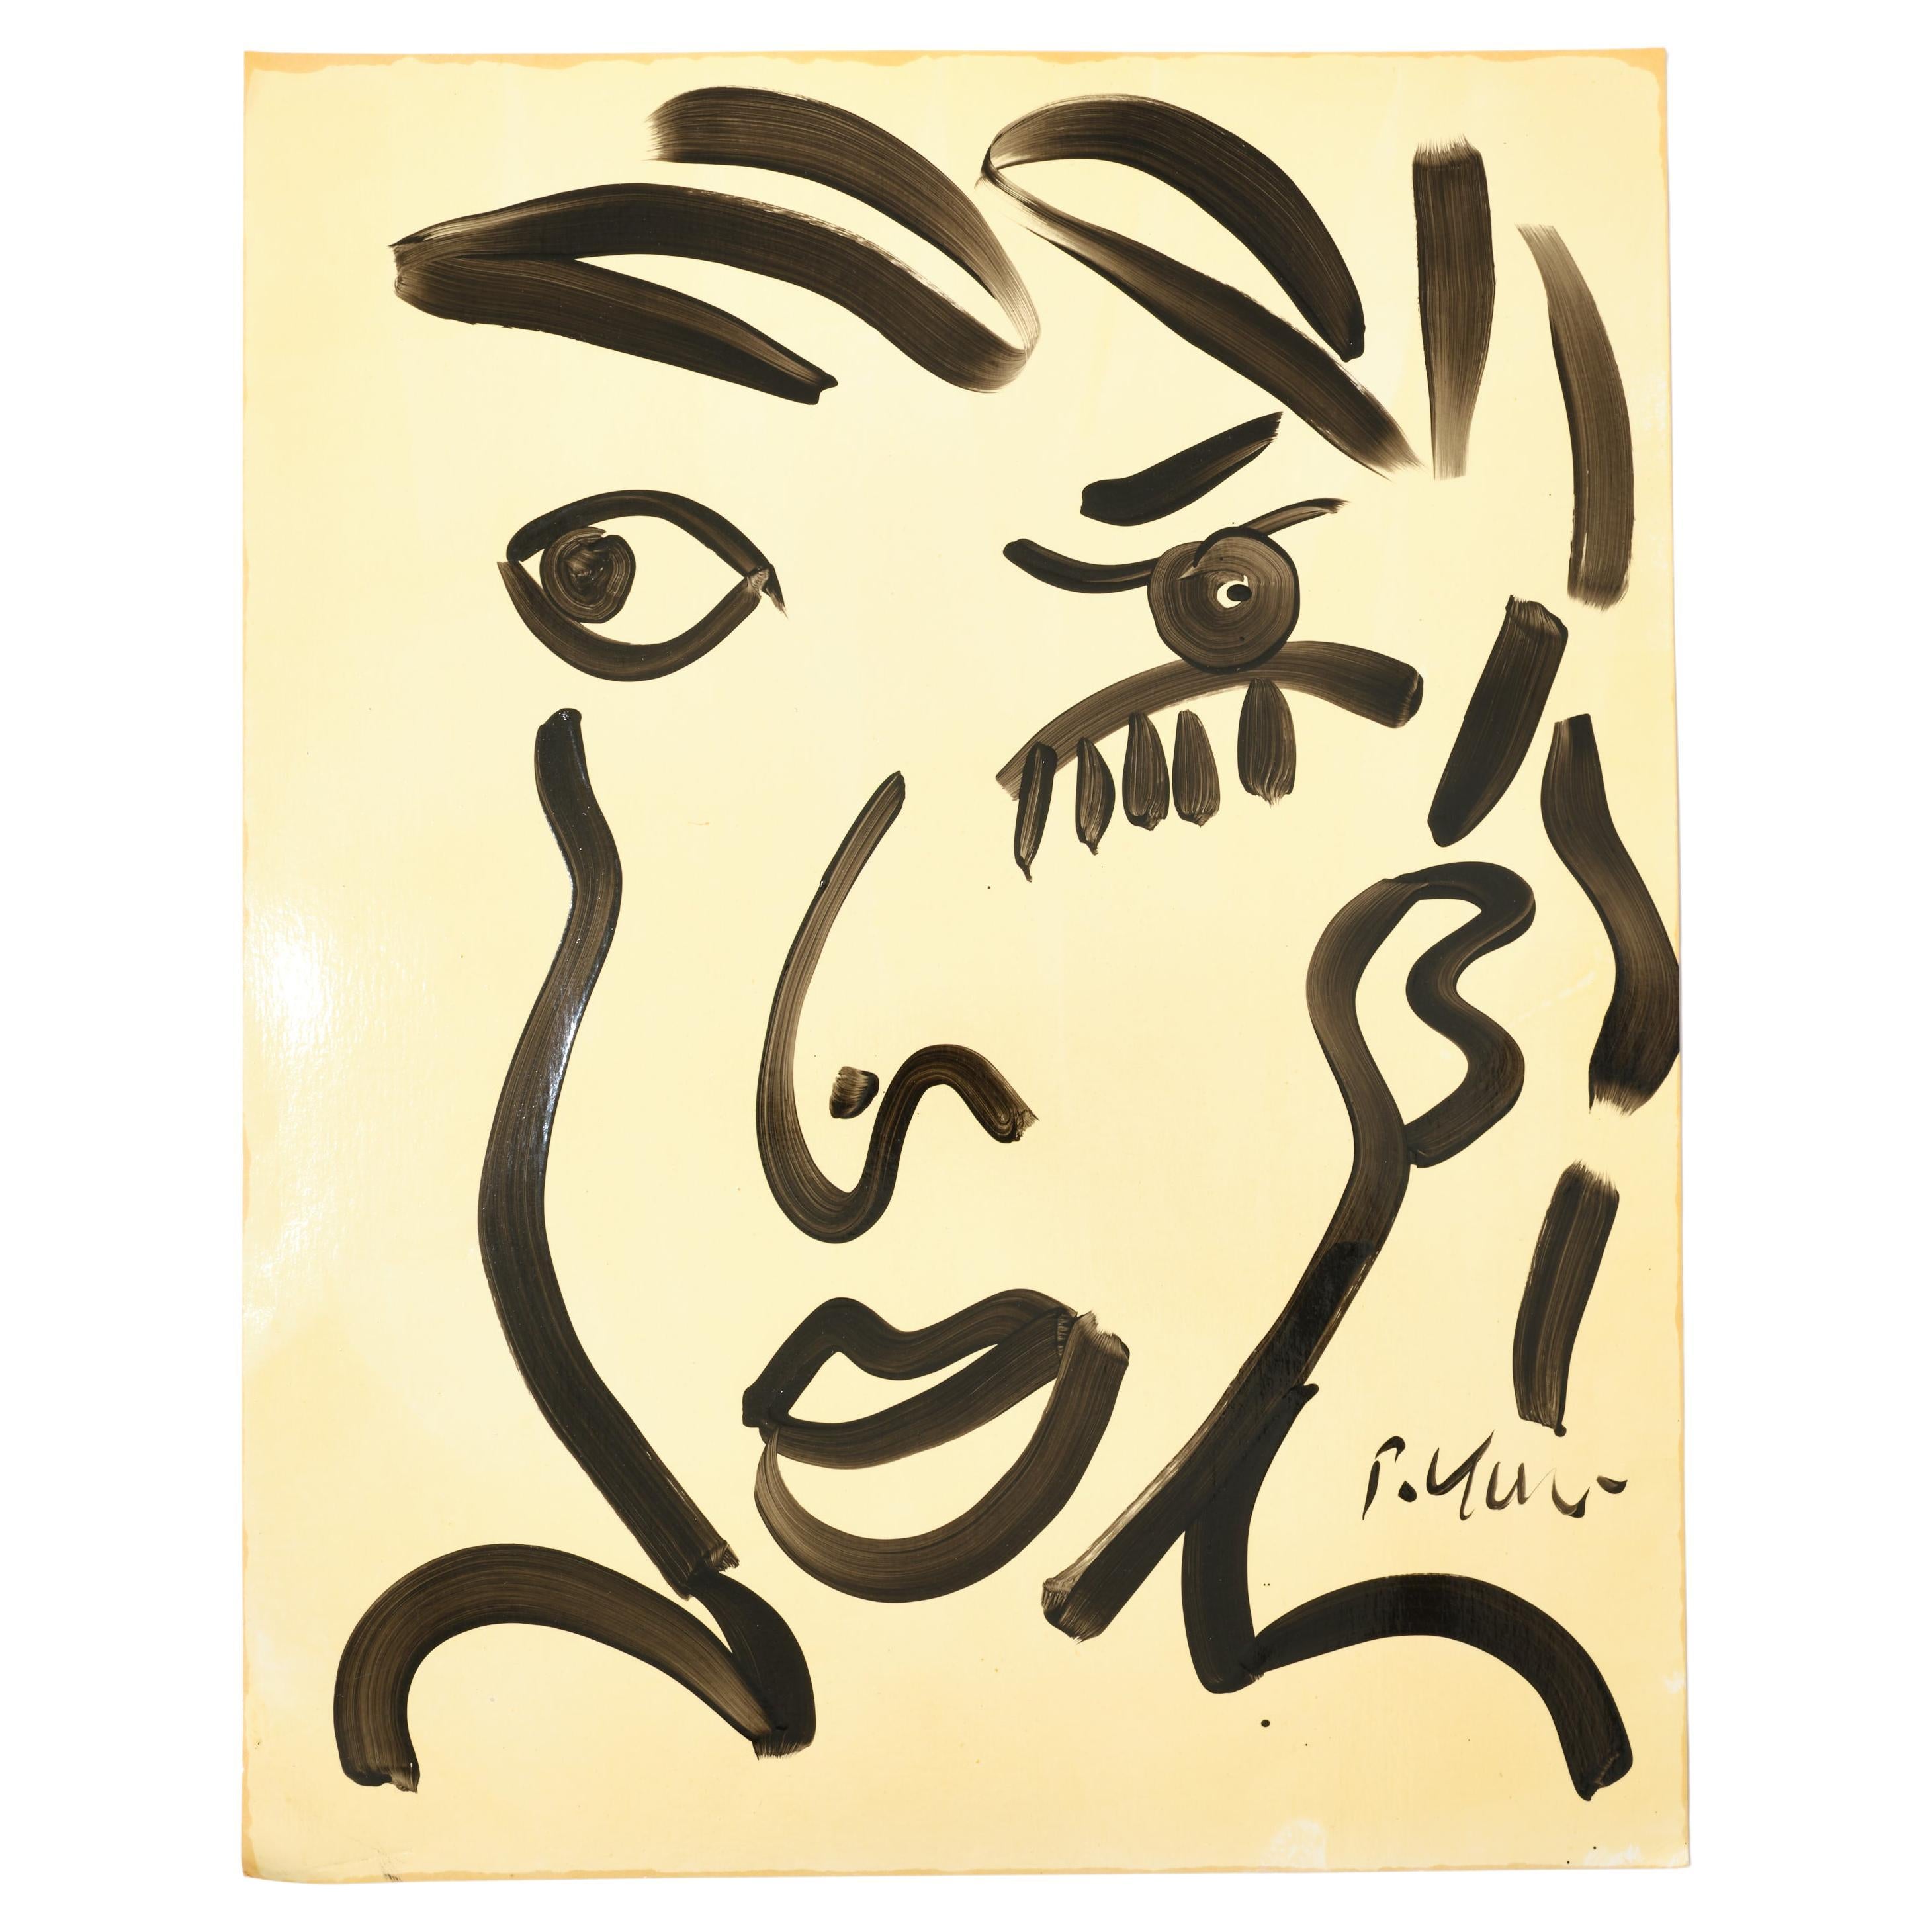 Painting by Peter Keil, Young Man Face, Acrylic On Paper, Signed, C 1964